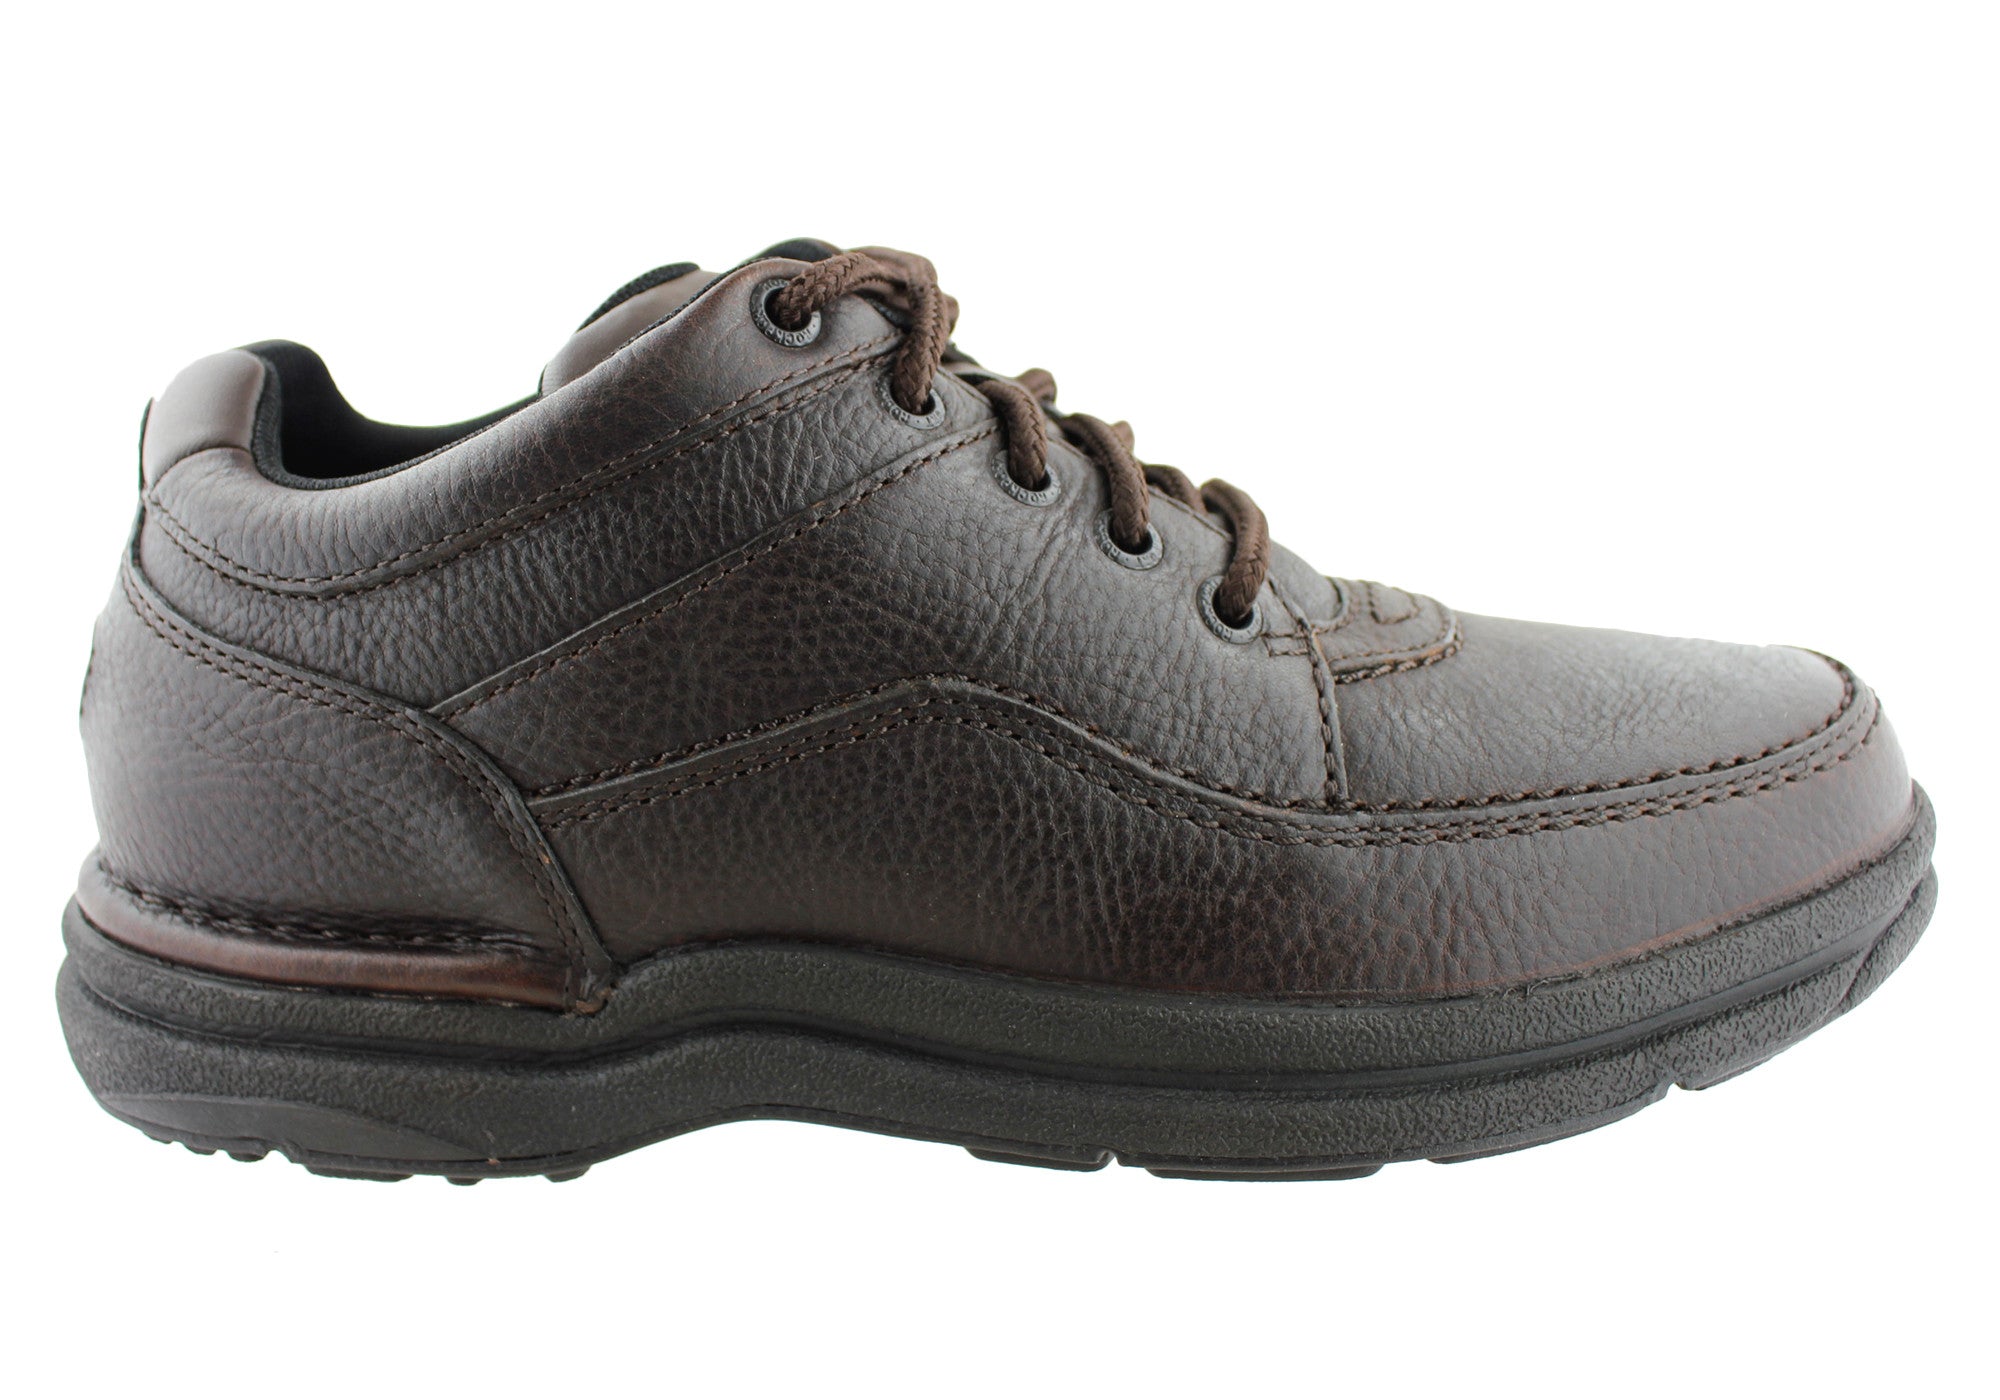 NEW ROCKPORT WORLD TOUR CLASSIC MENS COMFORT WIDE FIT WALKING SHOES | eBay